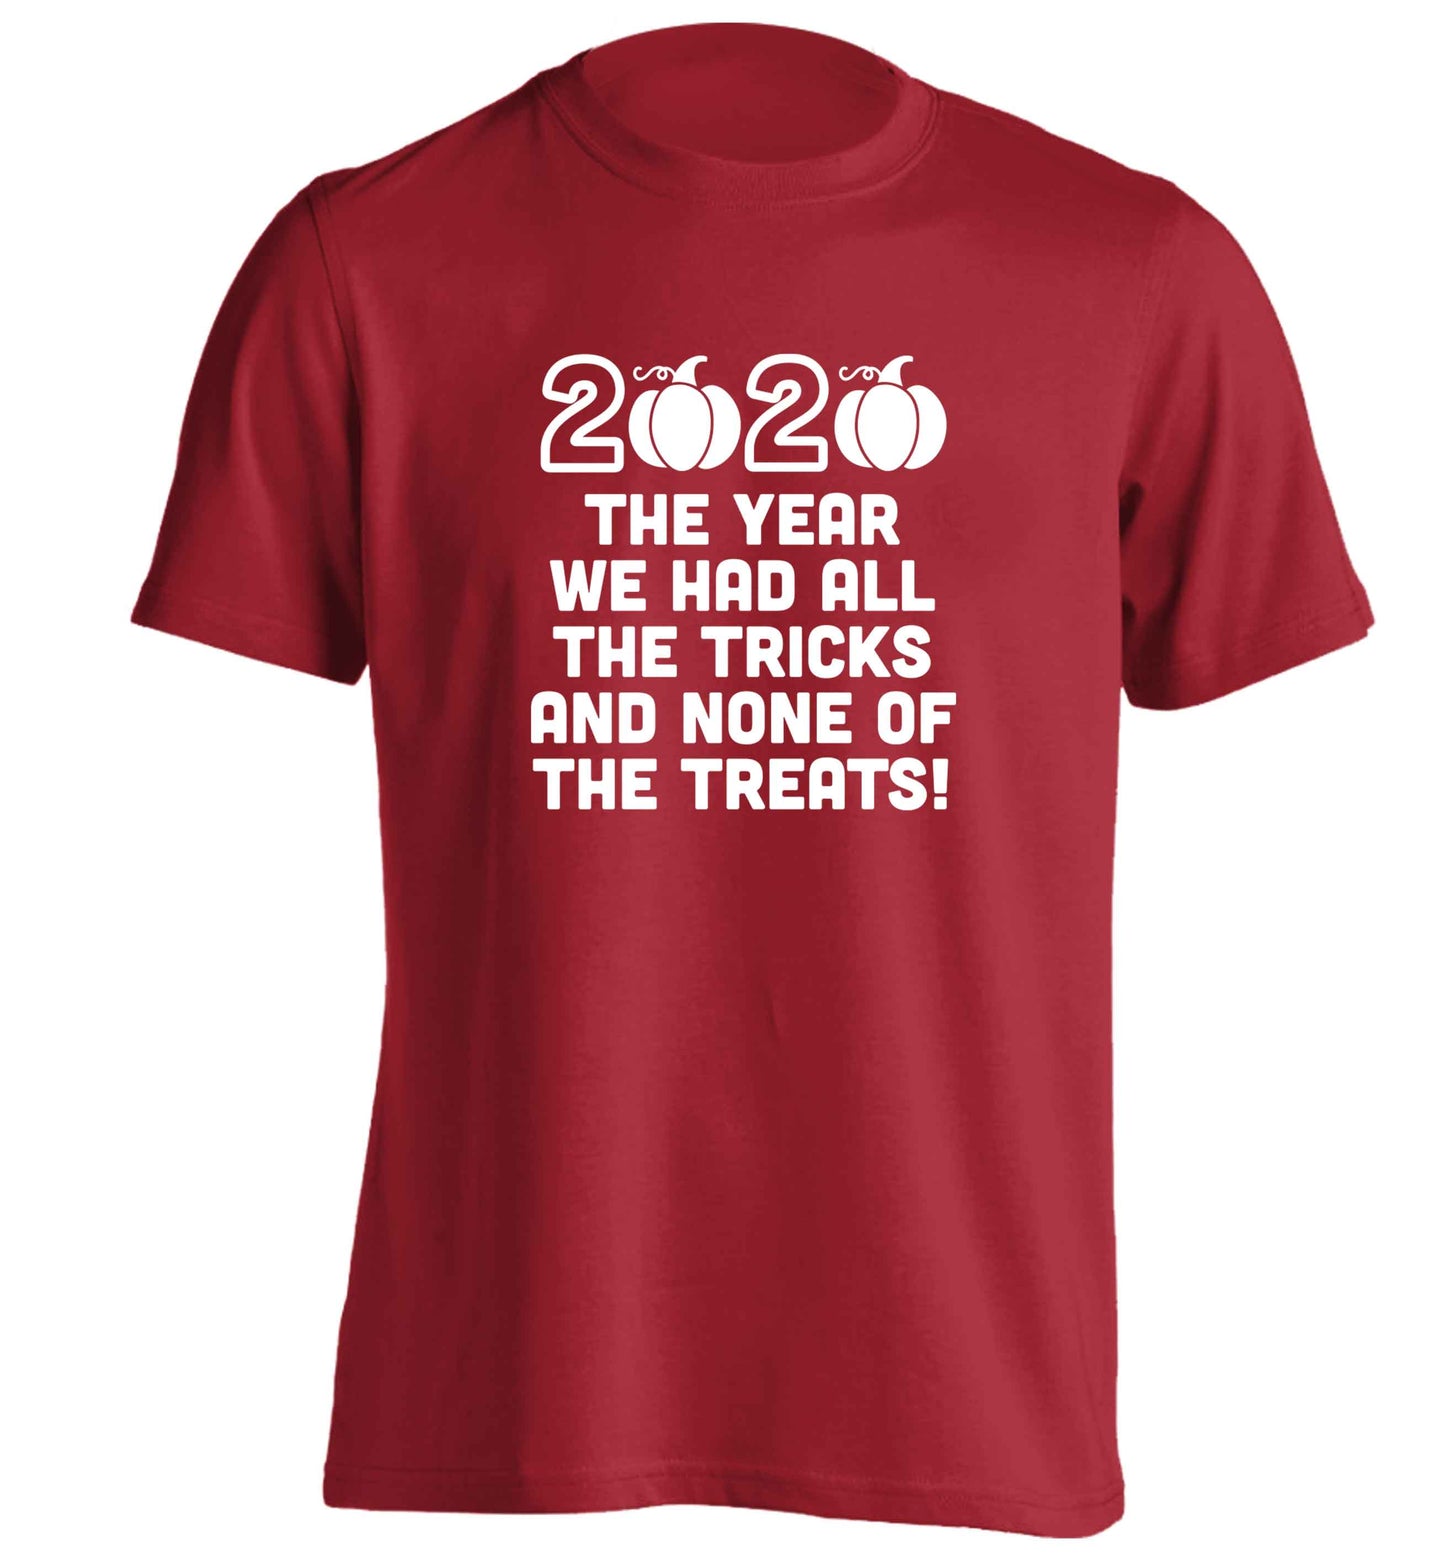 2020 The year we had all of the tricks and none of the treats adults unisex red Tshirt 2XL